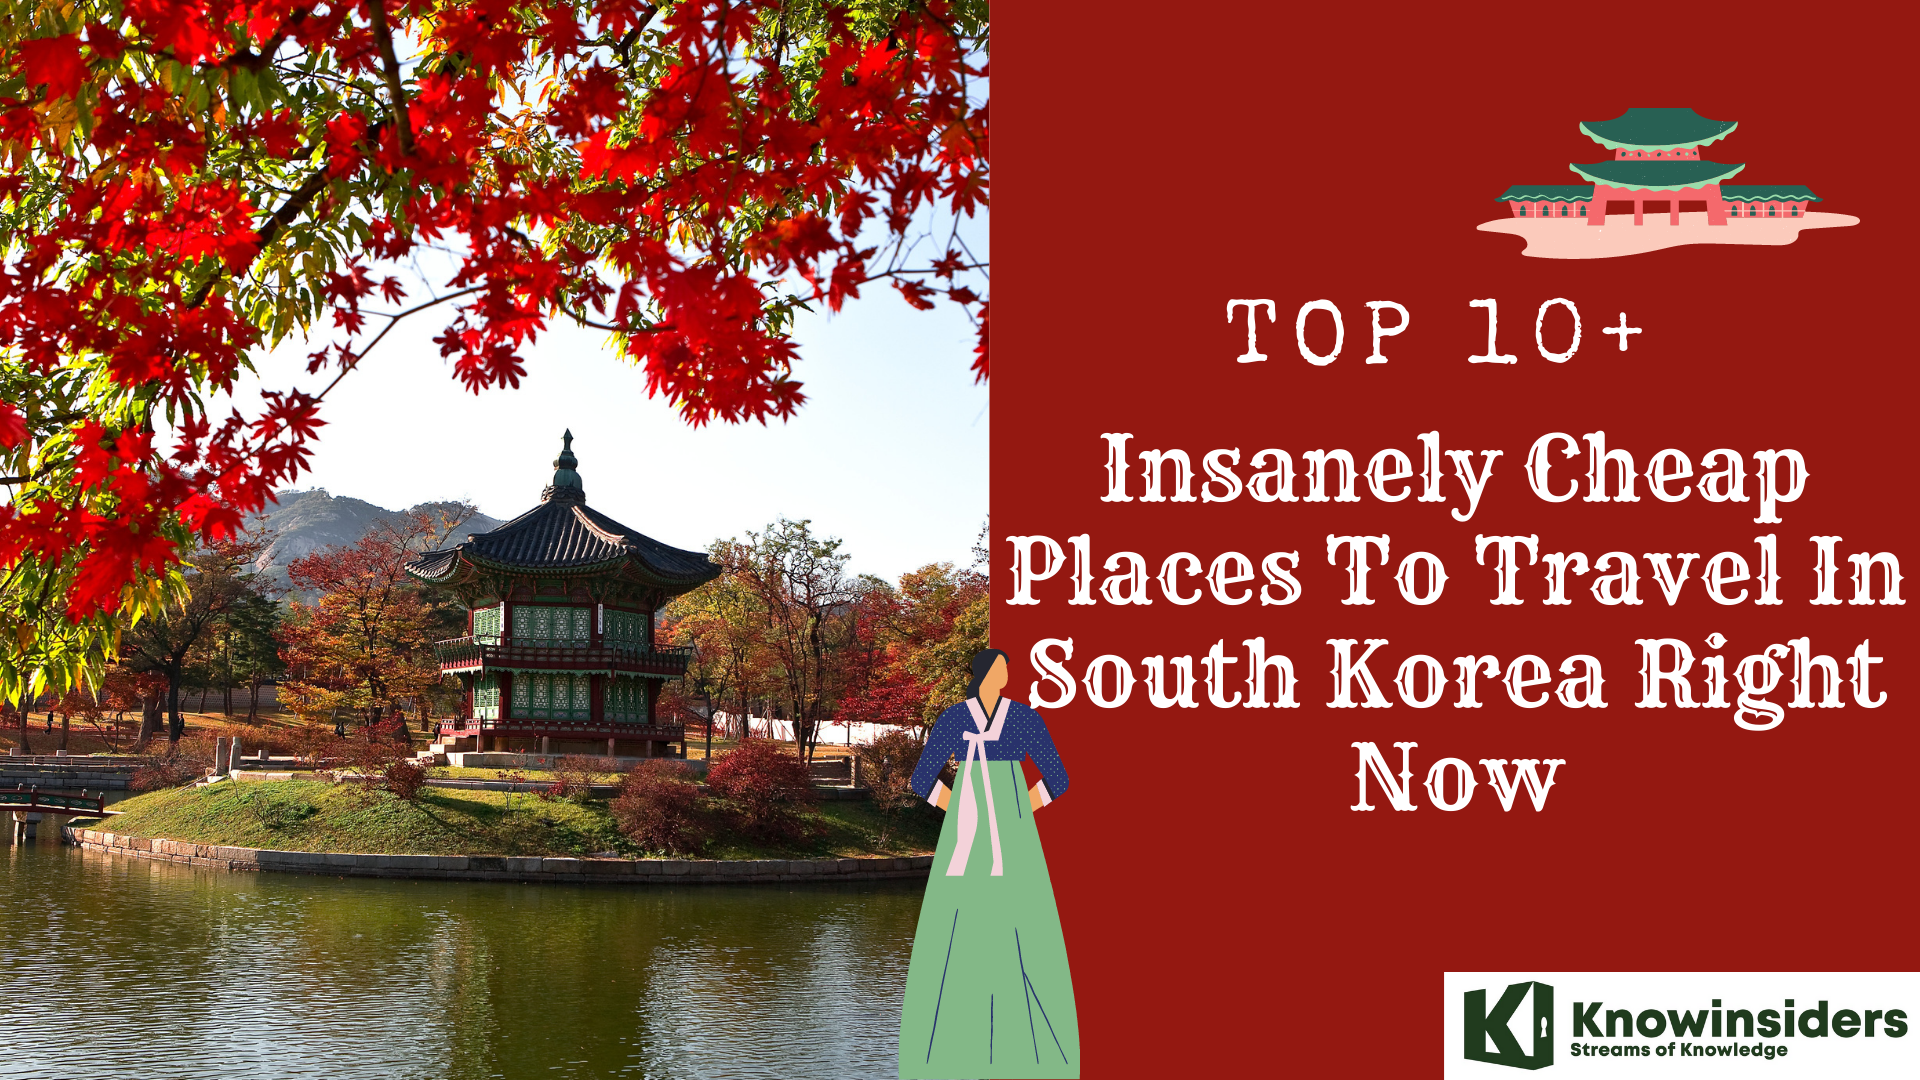 Top 10+ Insanely Cheap Places To Travel In South Korea Right Now